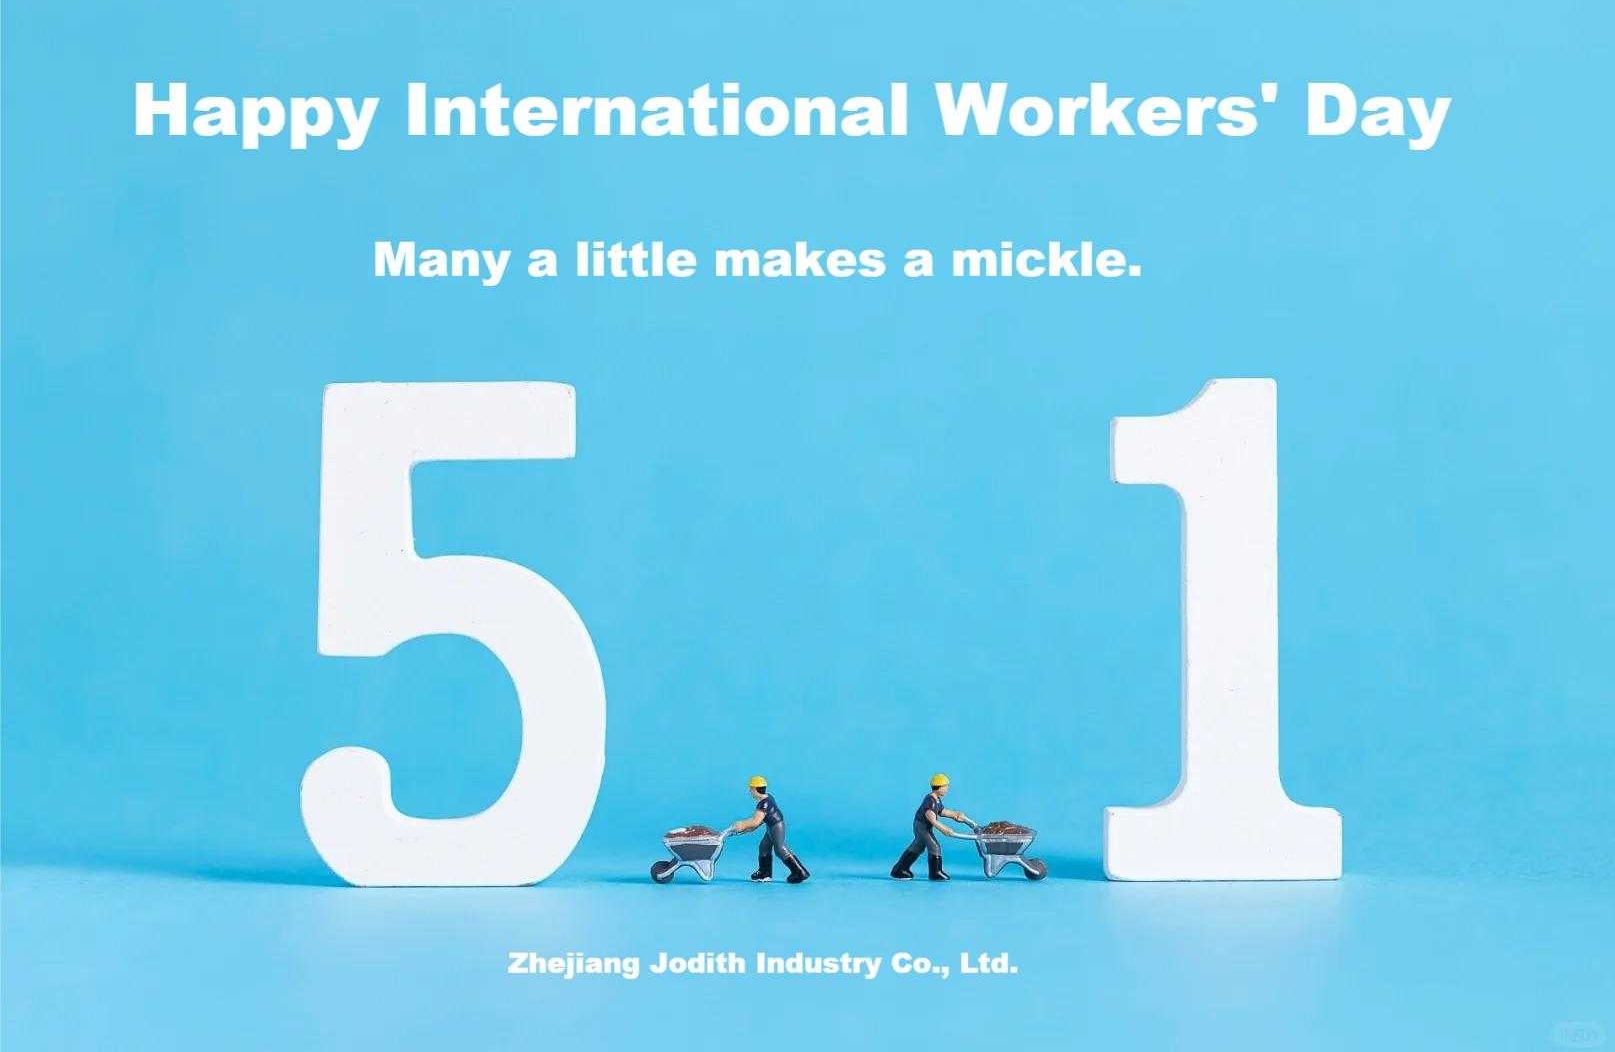 Jodith team wish you a Happy International Workers' Day 